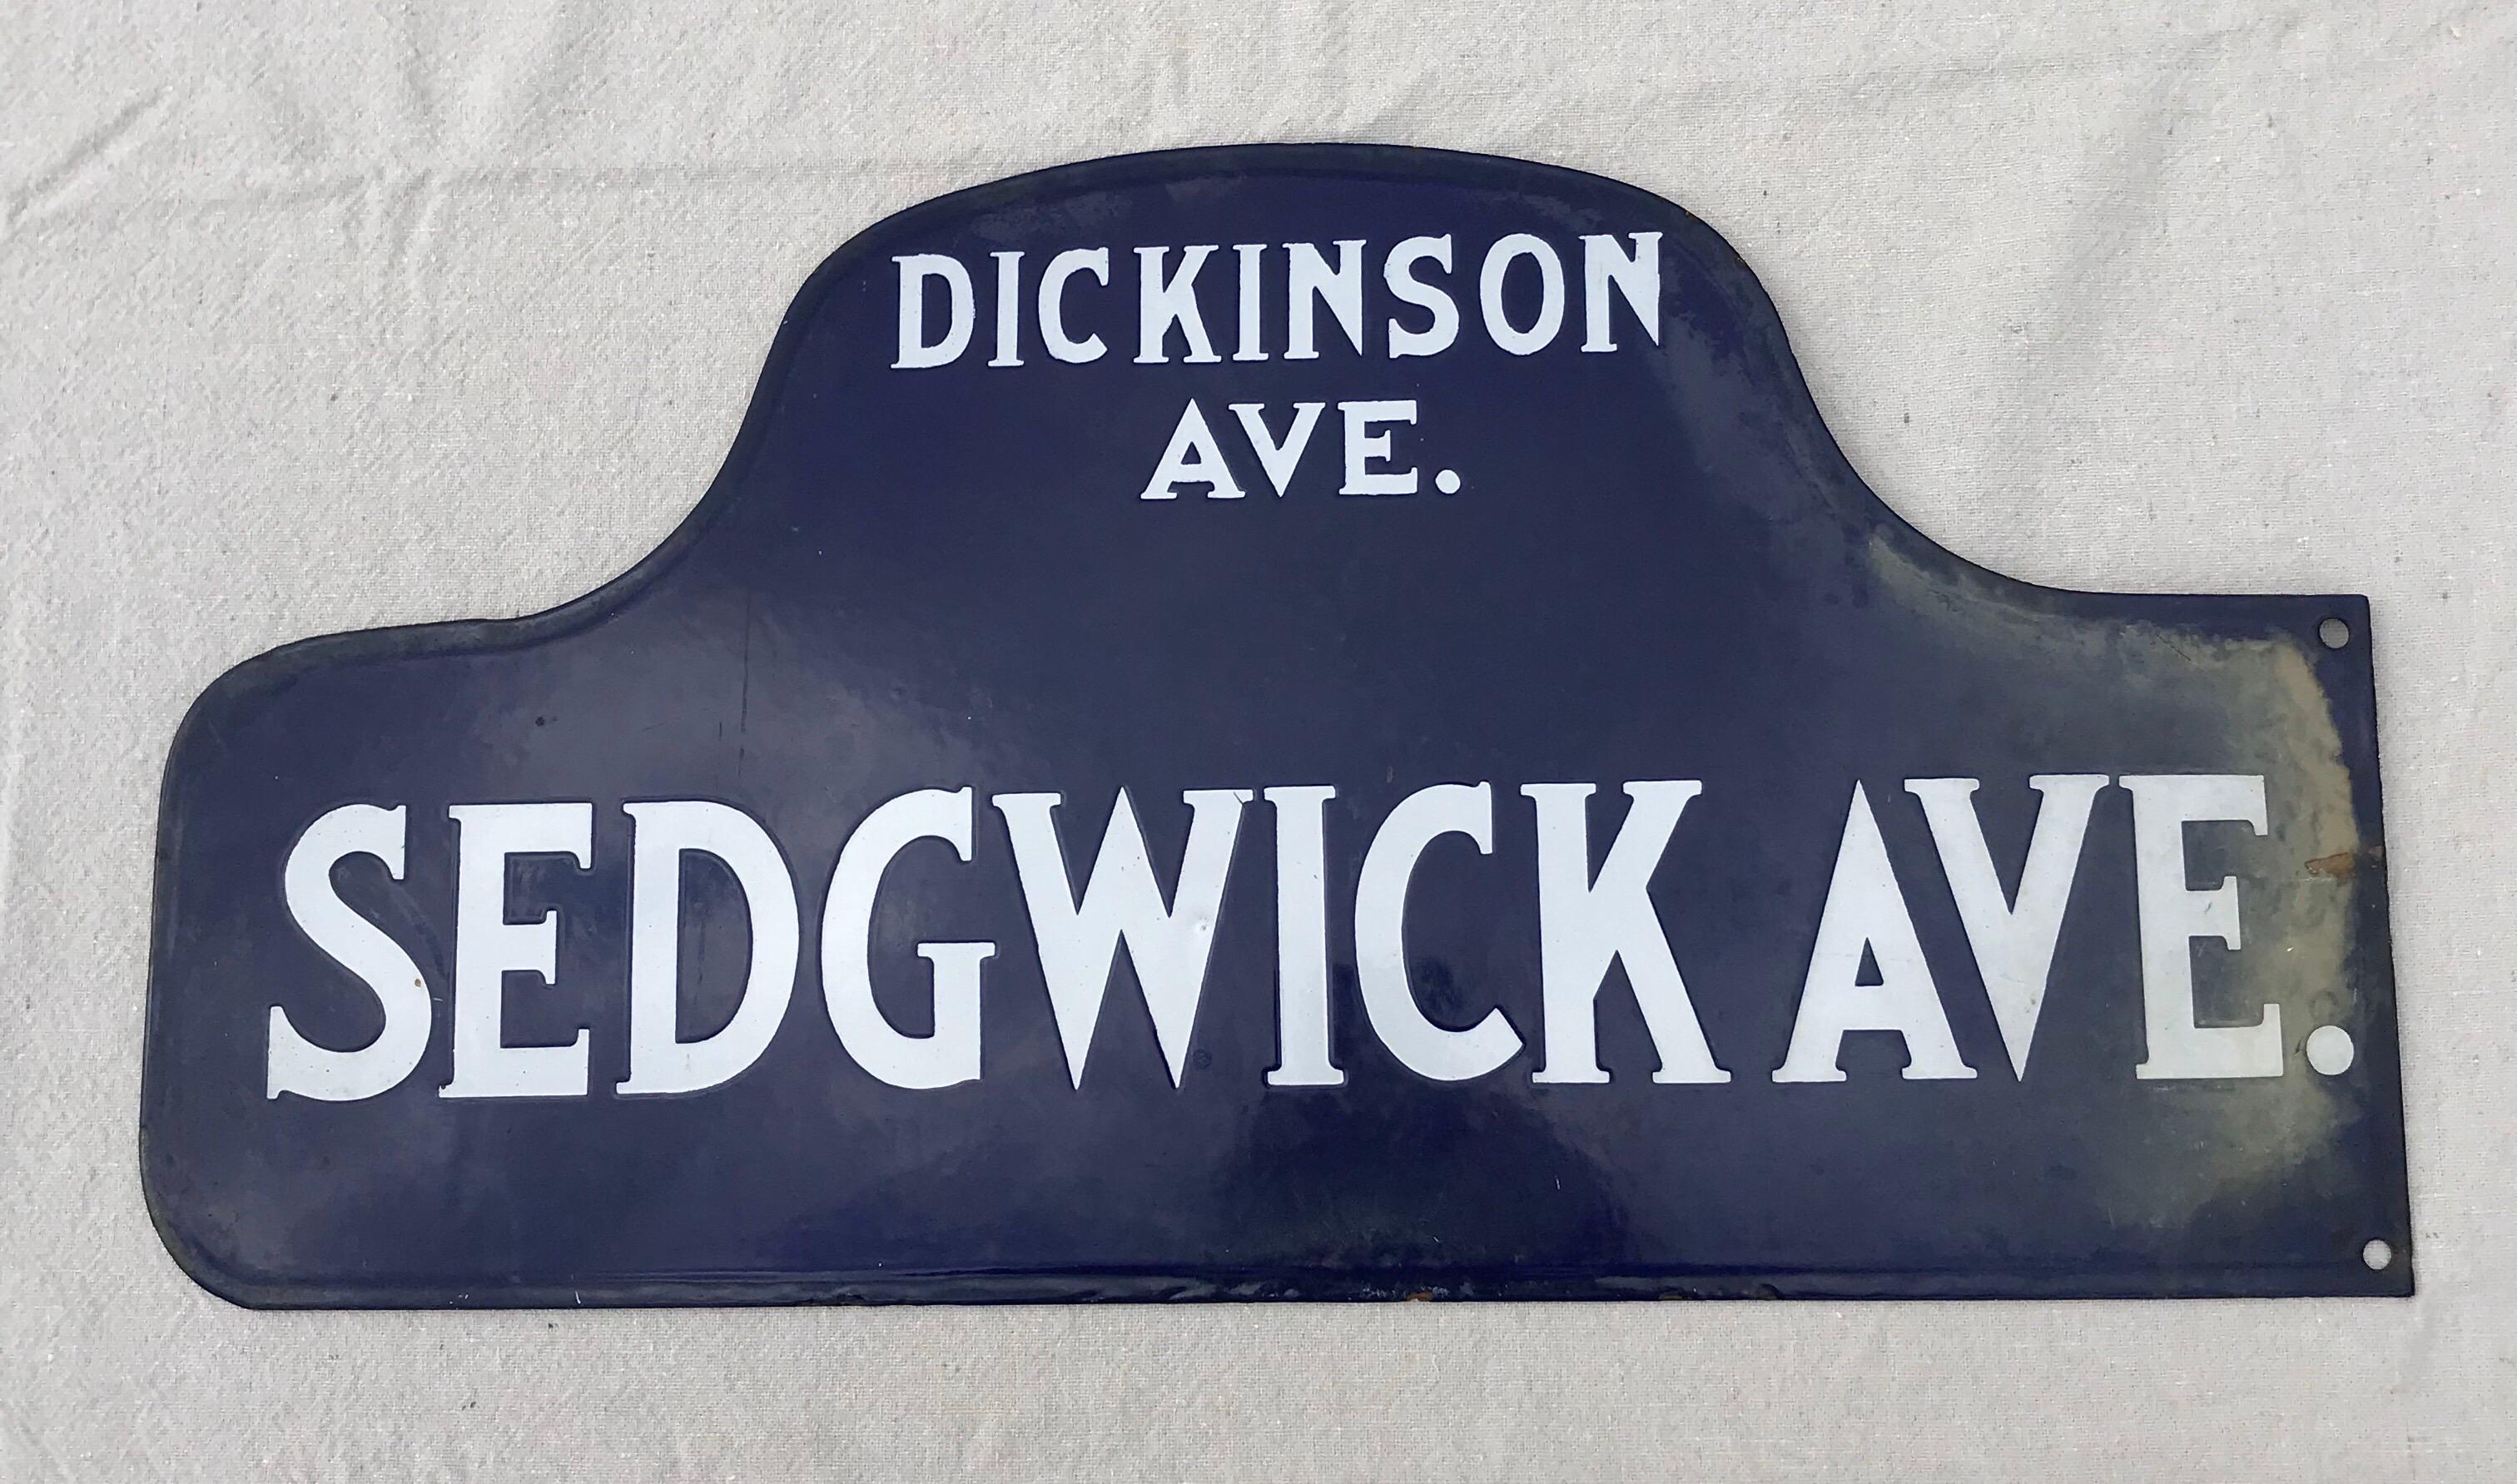 Antique porcelain humpback double sided NYC Street Sign, circa early 1900s. Cobalt blue enamel and white enamel. Sign says Sedgwick Ave & Dickinson Ave. In the Bronx, NY zip code 10463. Collectible Classic piece of NYC History. This item will parcel